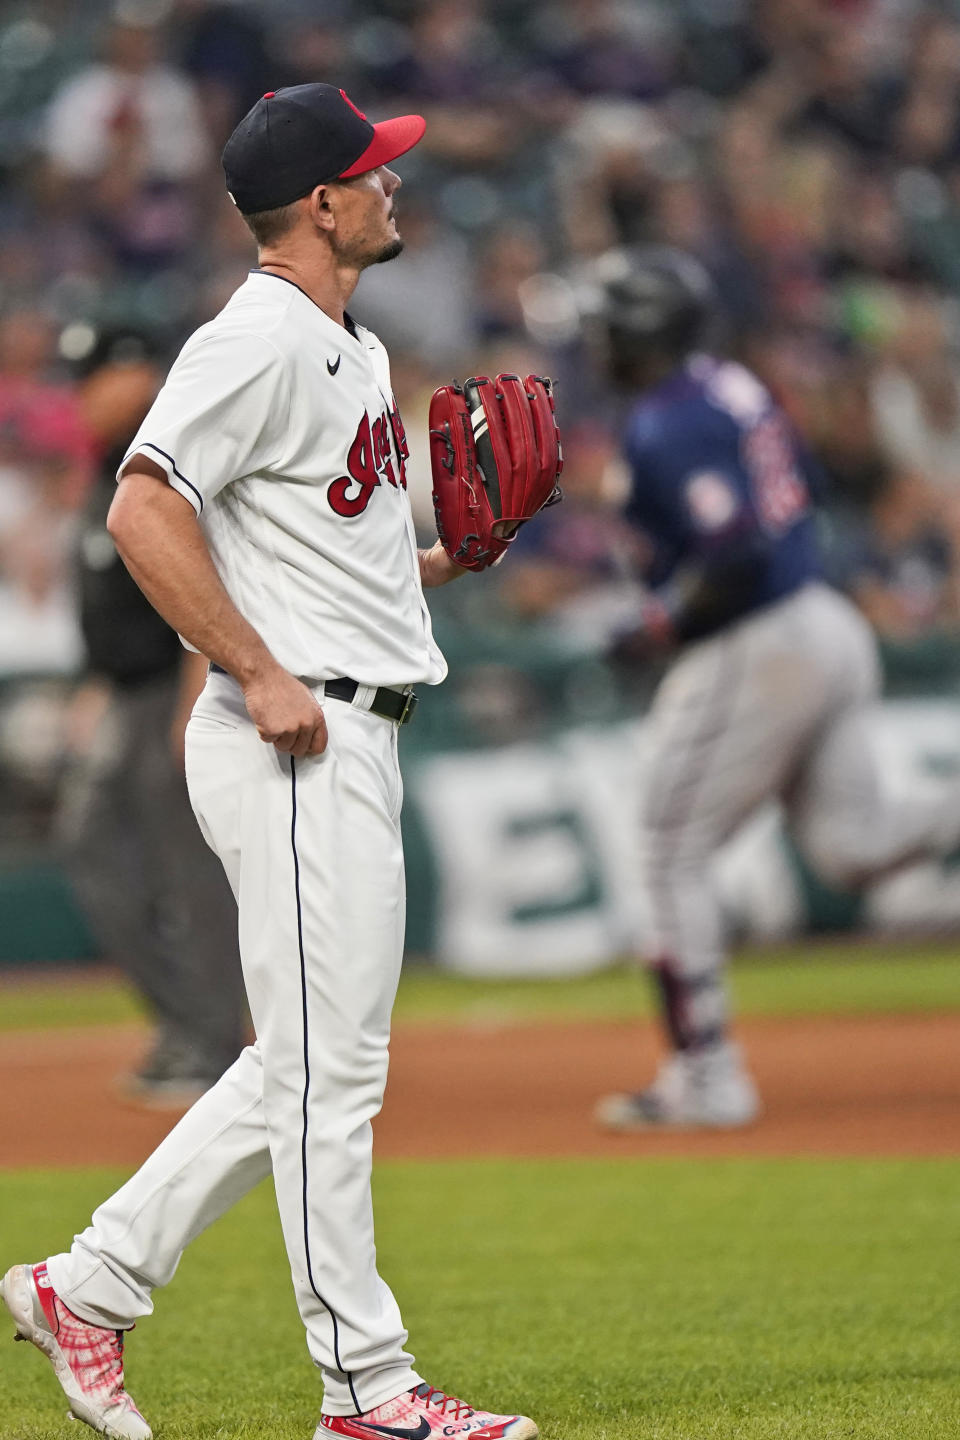 Cleveland Indians relief pitcher Nick Wittgren waits for Minnesota Twins' Miguel Sano to run the bases after Sano hit a solo home run during the seventh inning of a baseball game Wednesday, Sept. 8, 2021, in Cleveland. (AP Photo/Tony Dejak)